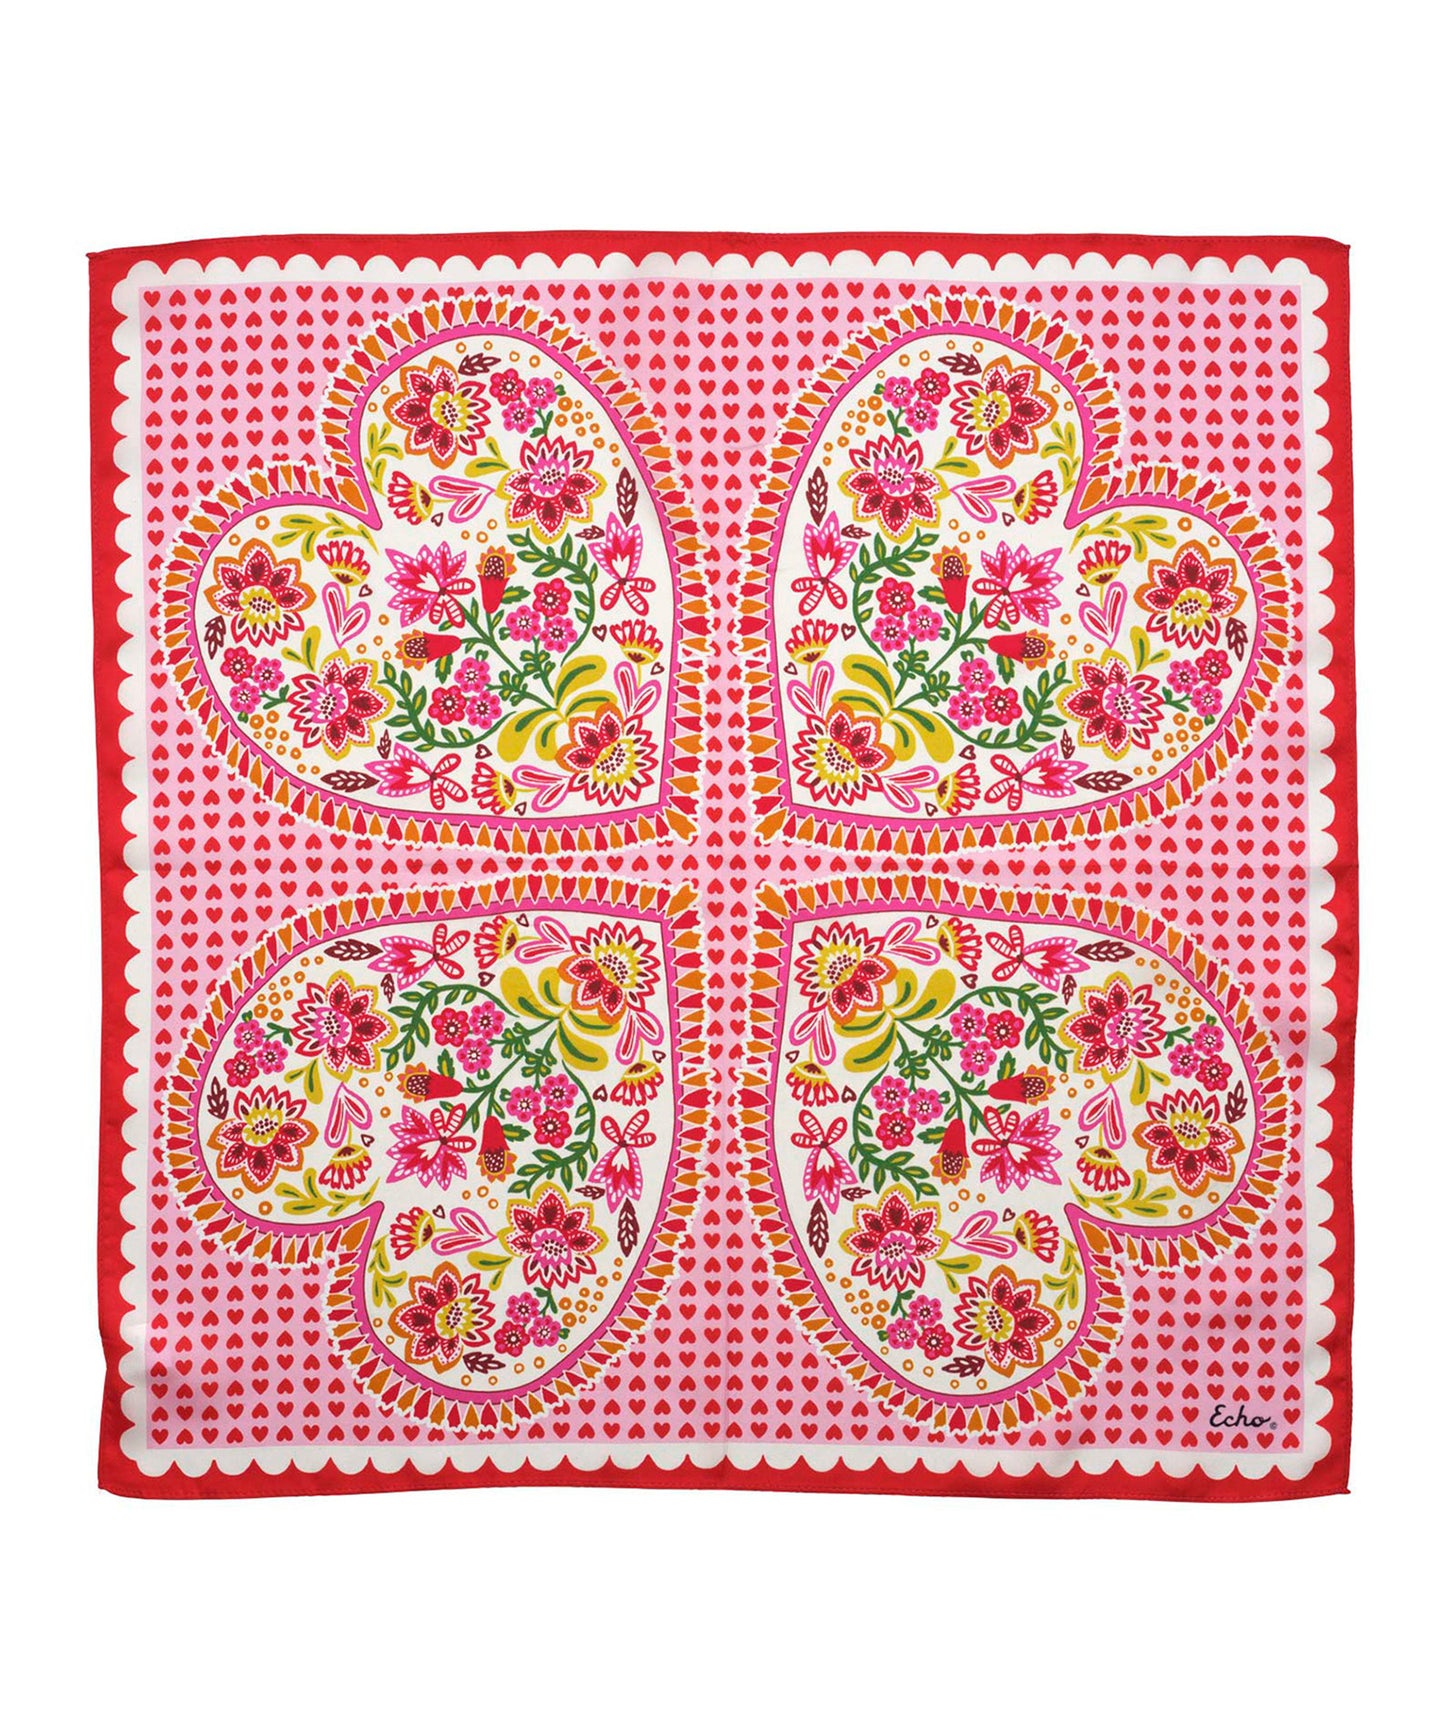 Sweetie Silk Bandana in color candy pink